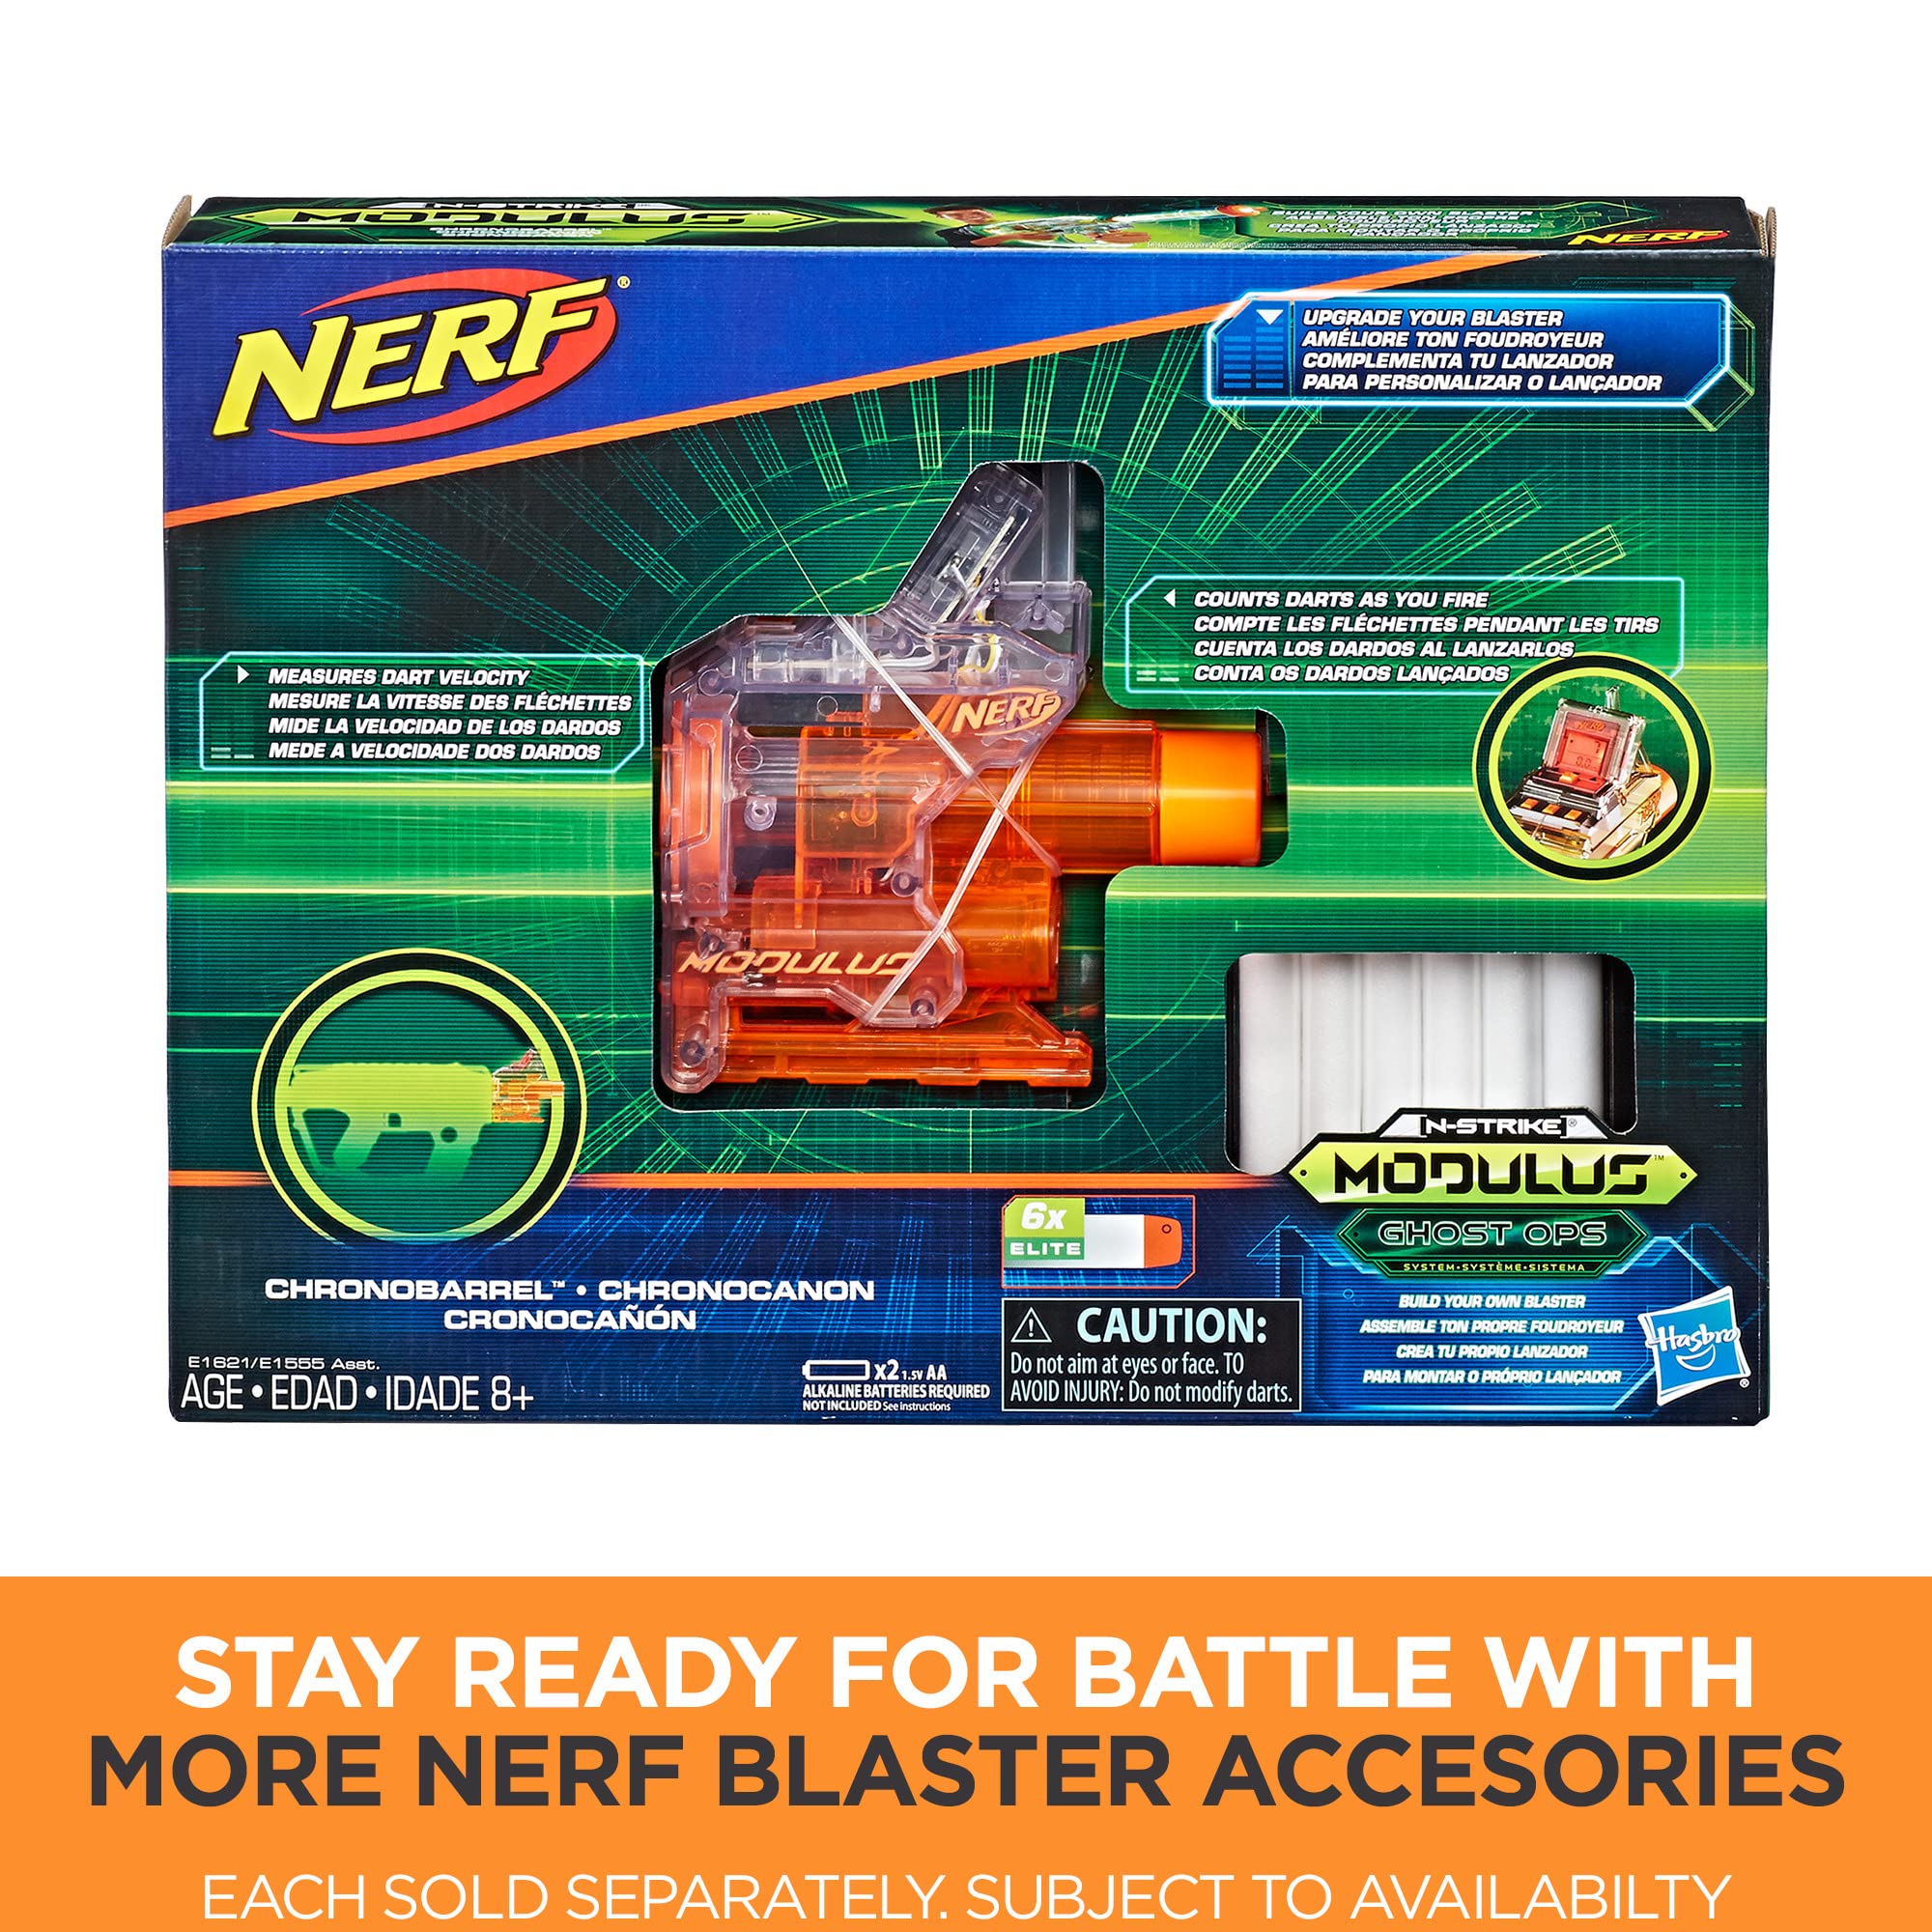 NERF Modulus Ghost Ops Evader Motorized Blaster - Light-Up See-Through Blaster and Barrel Extension, Includes 12 Official Elite Darts (Amazon Exclusive)